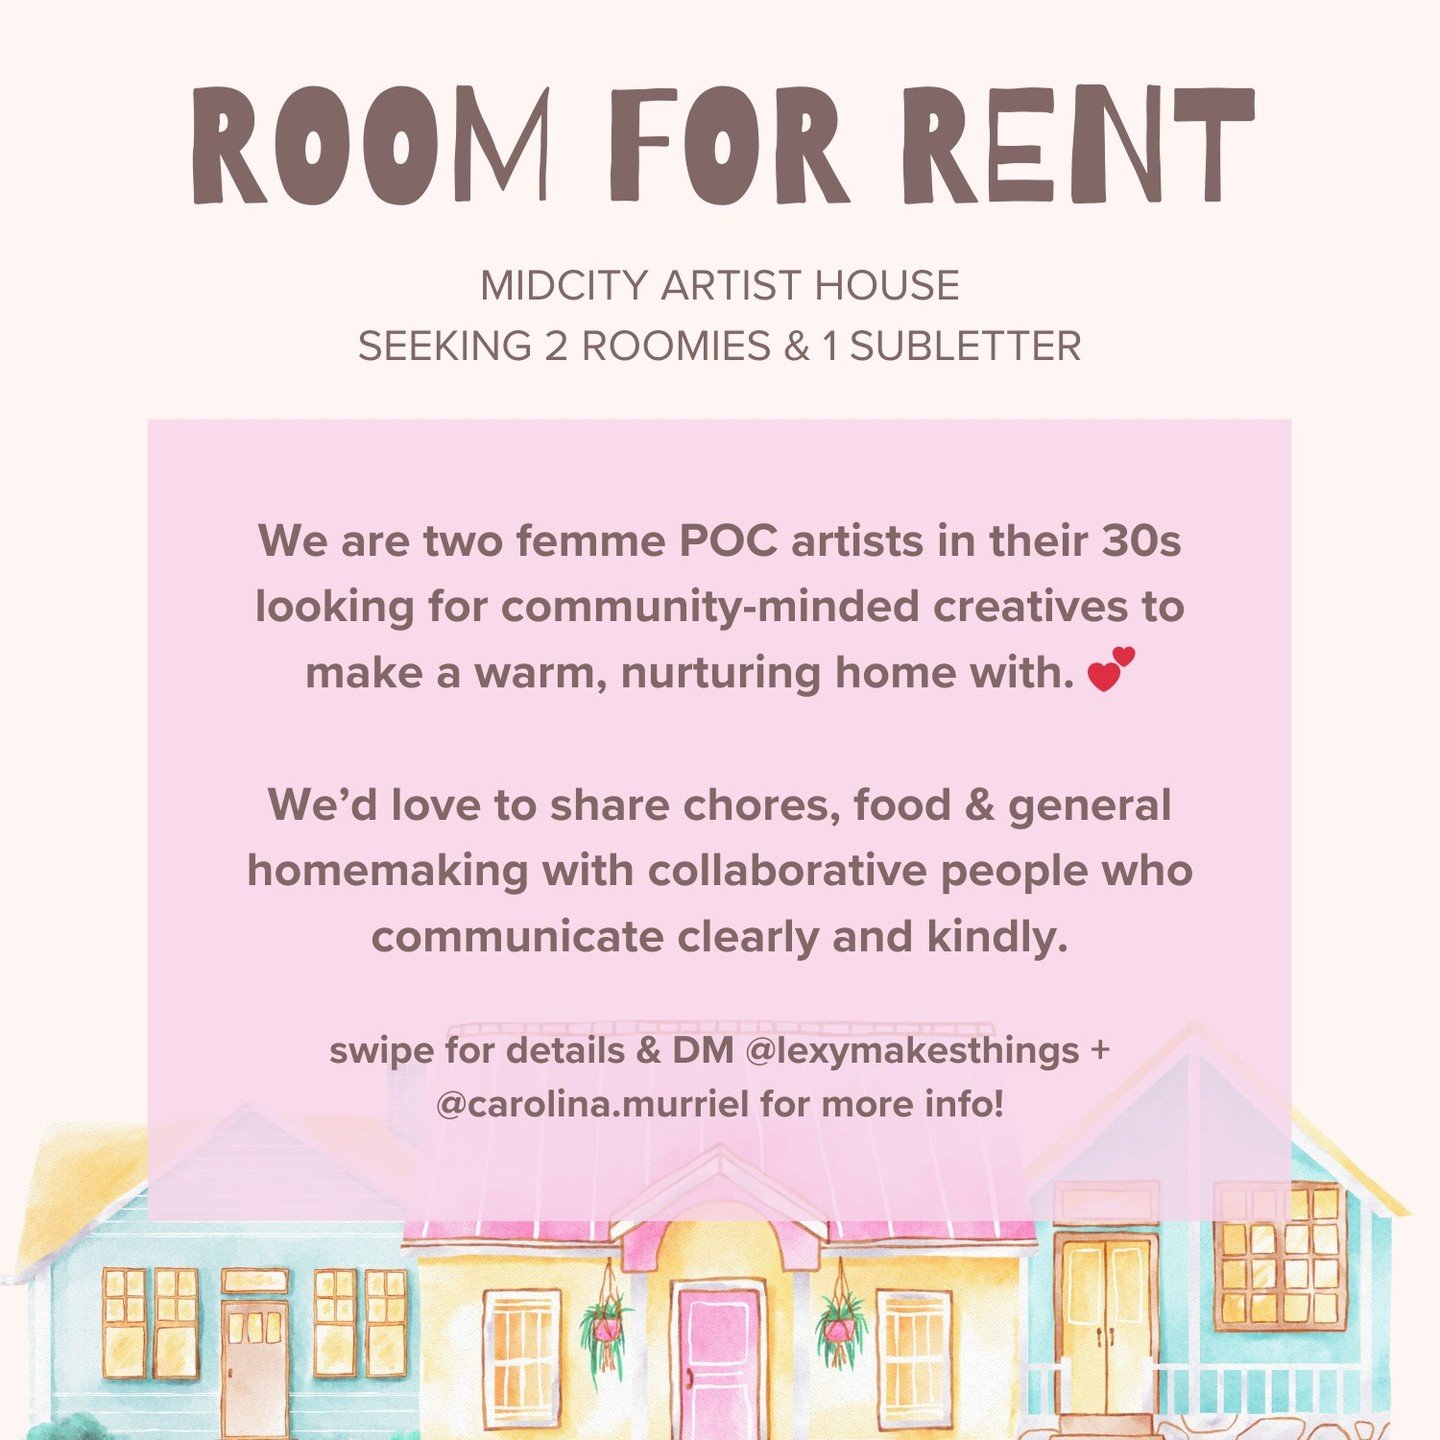 Hiiii! Current project: @carolina.murriel and I are seeking some roommates for our beautiful, spacious, creative semi-communal home in New Orleans. Our vibe is bike ride by the bayou, game night &amp; homemade pie, textile sculpture crochet blanket, 